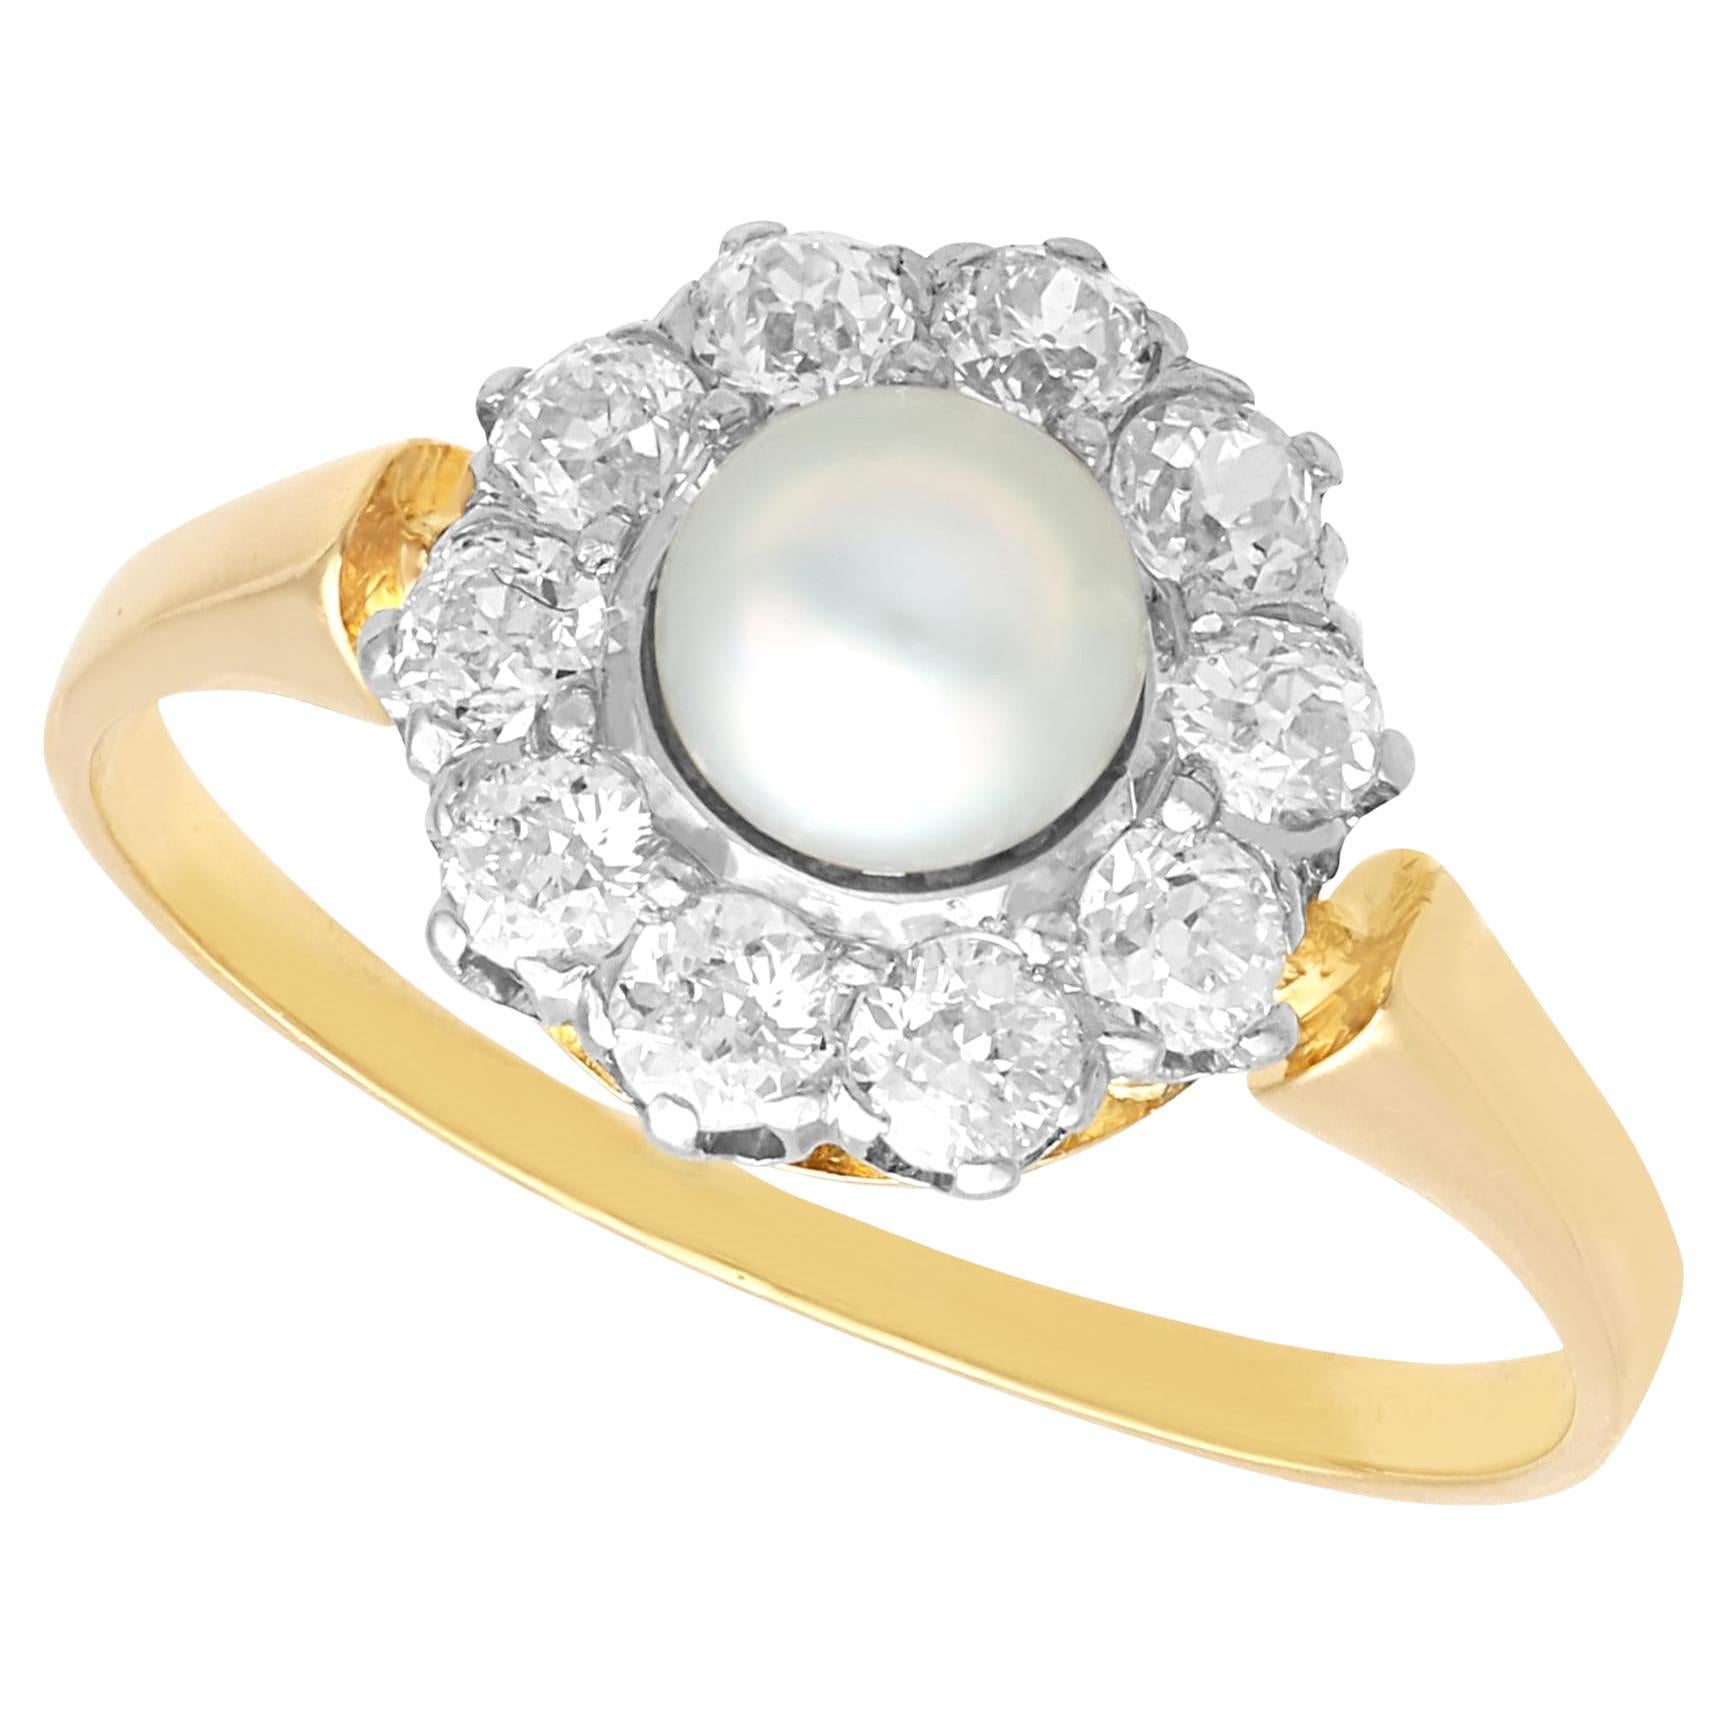 Edwardian Pearl and 0.30 Carat Diamond 18k Yellow Gold Cluster Ring